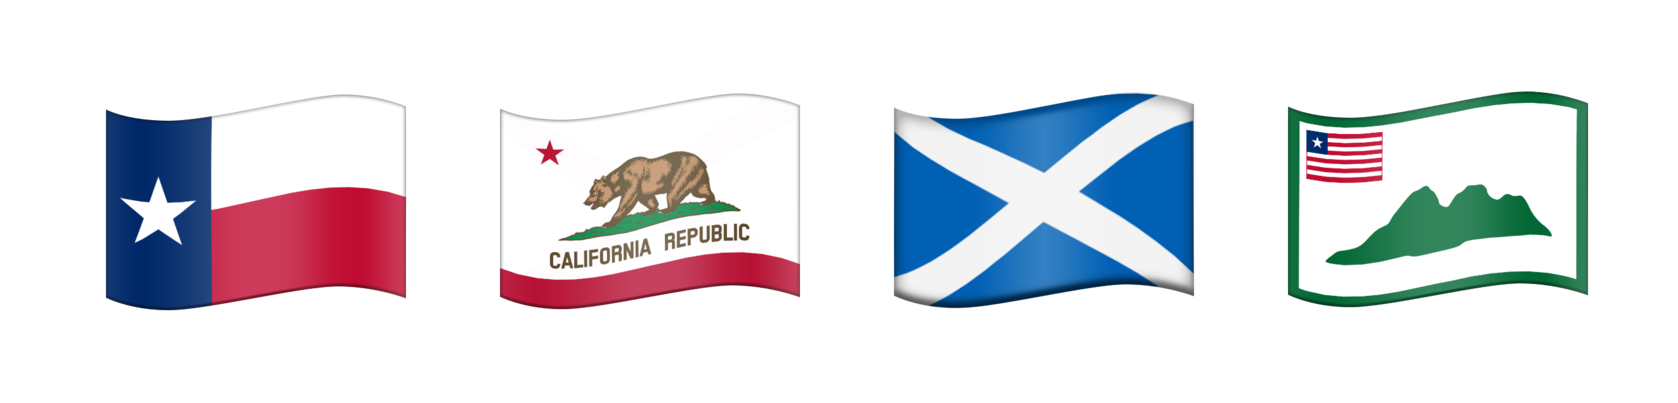 Us State Flag Emojis Now Possible